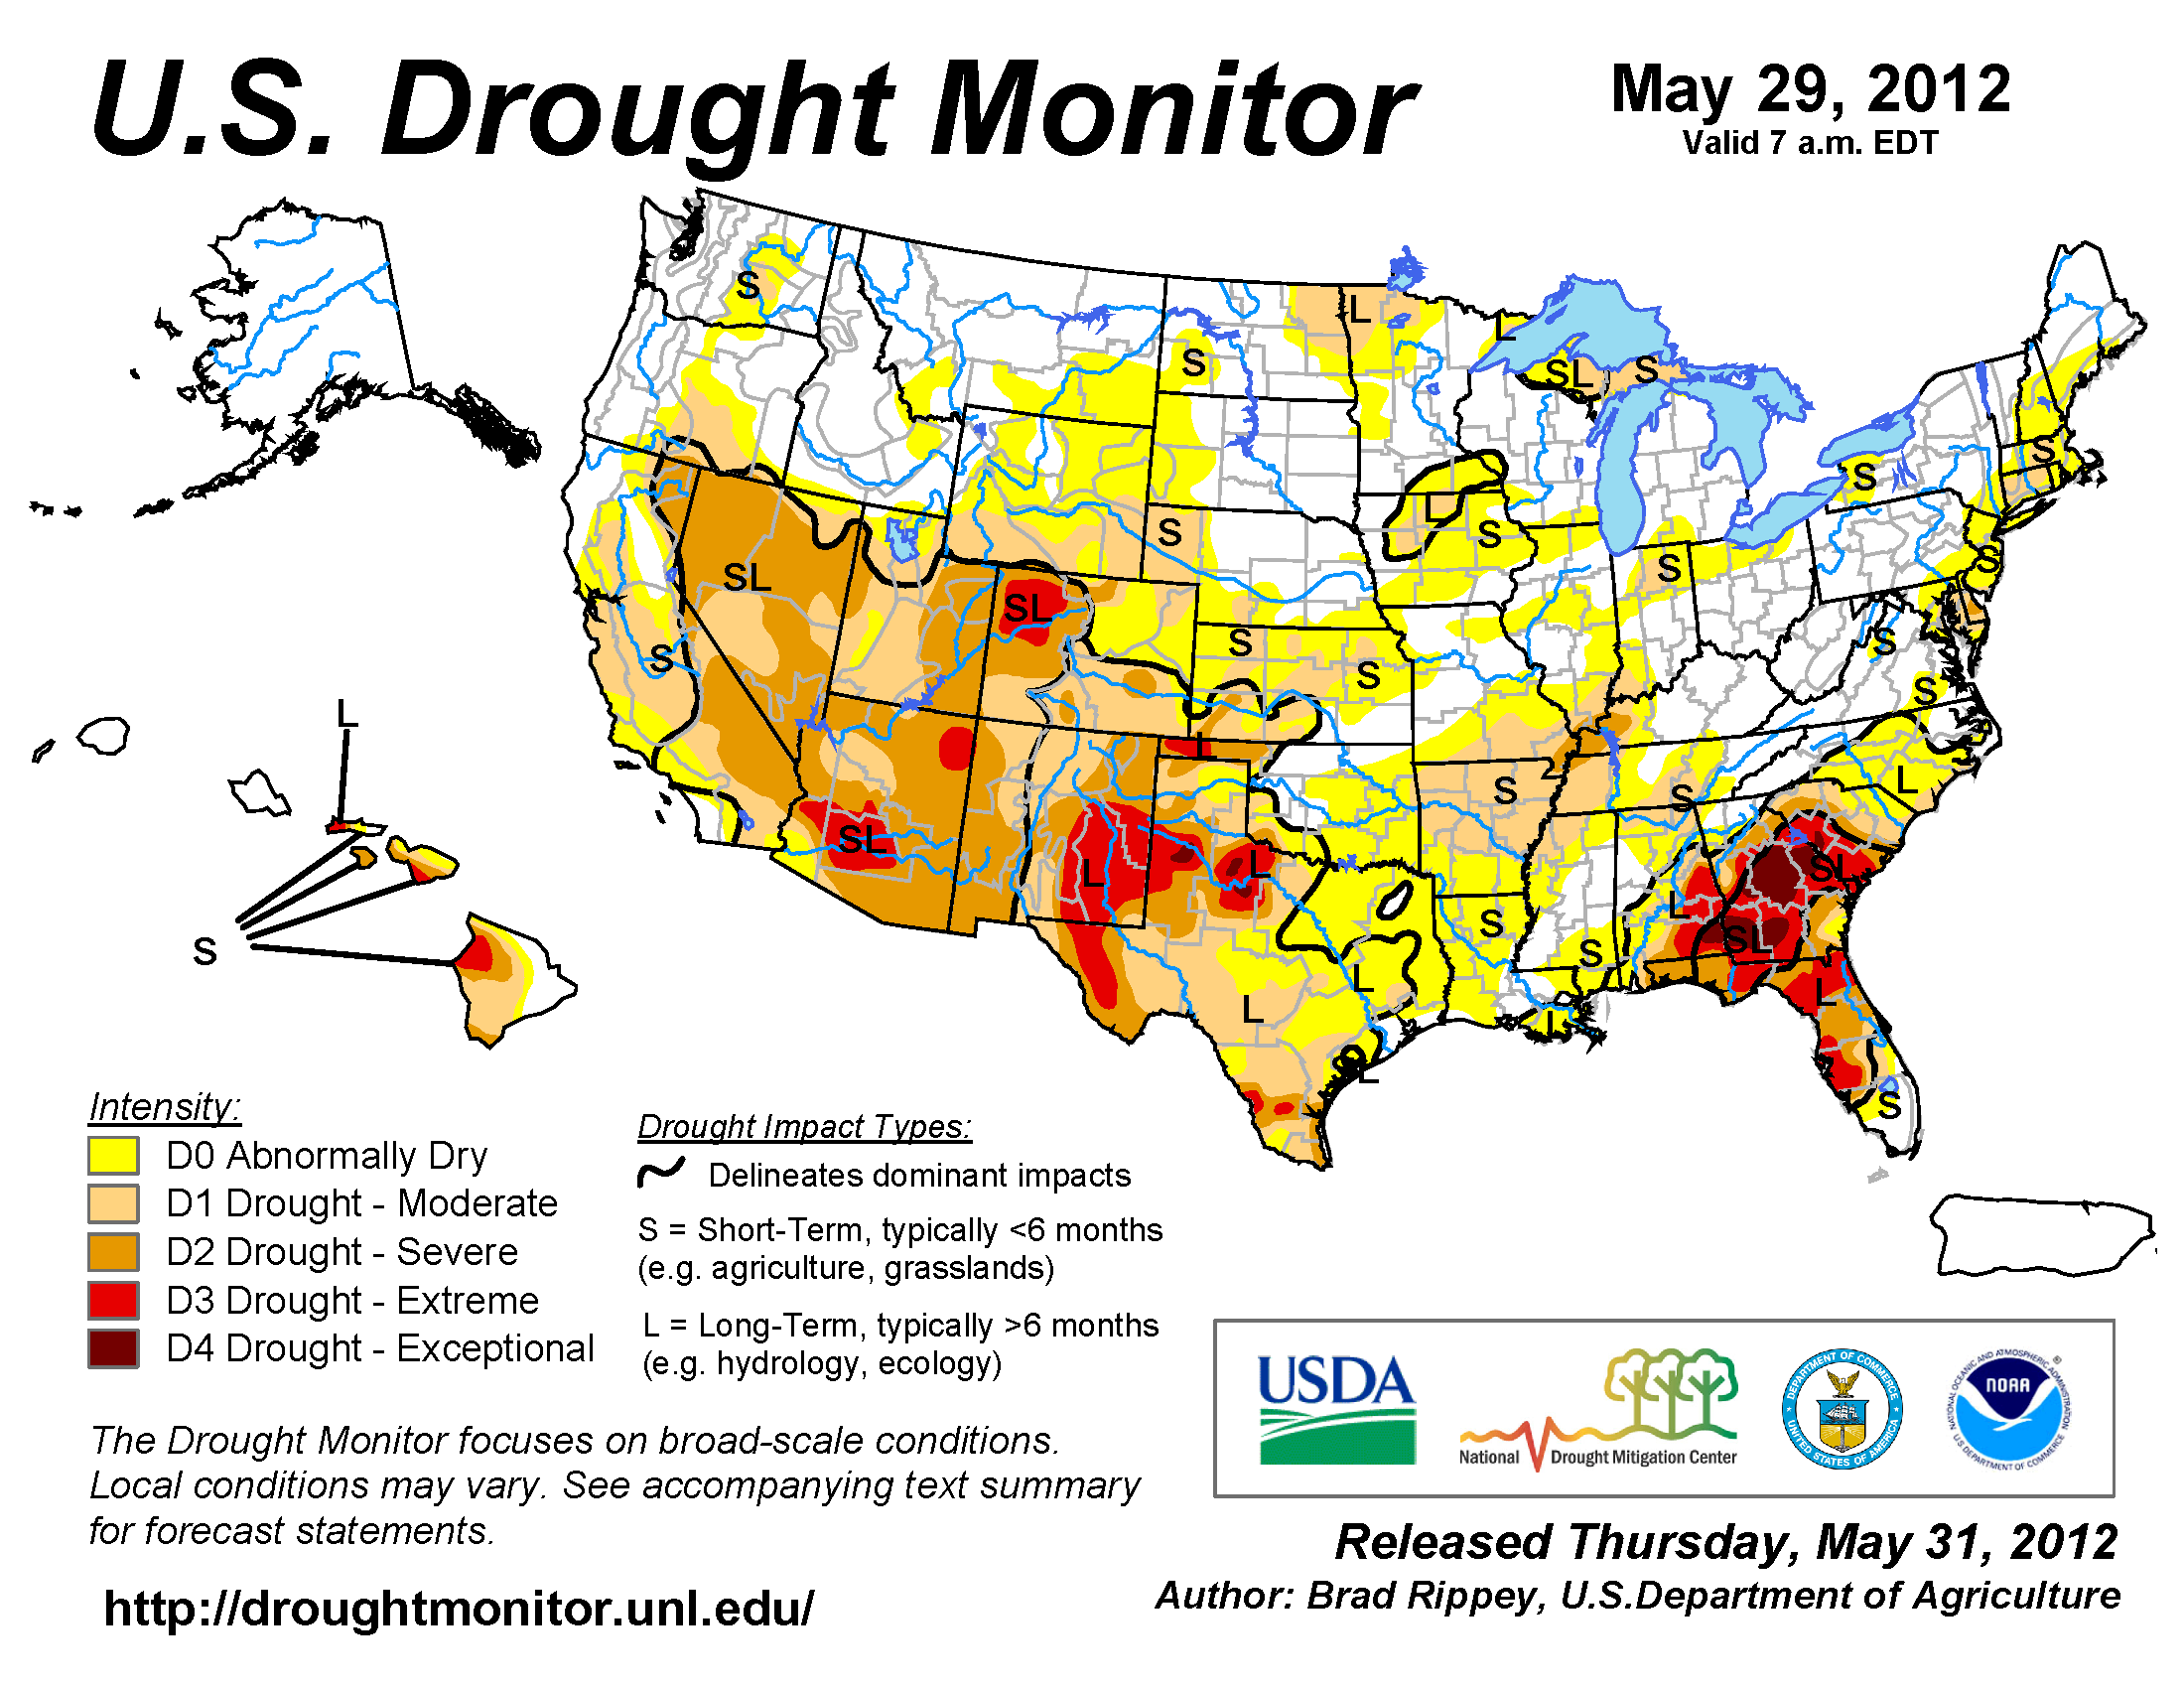 U.S. Drought Monitor map from 29 May 2012